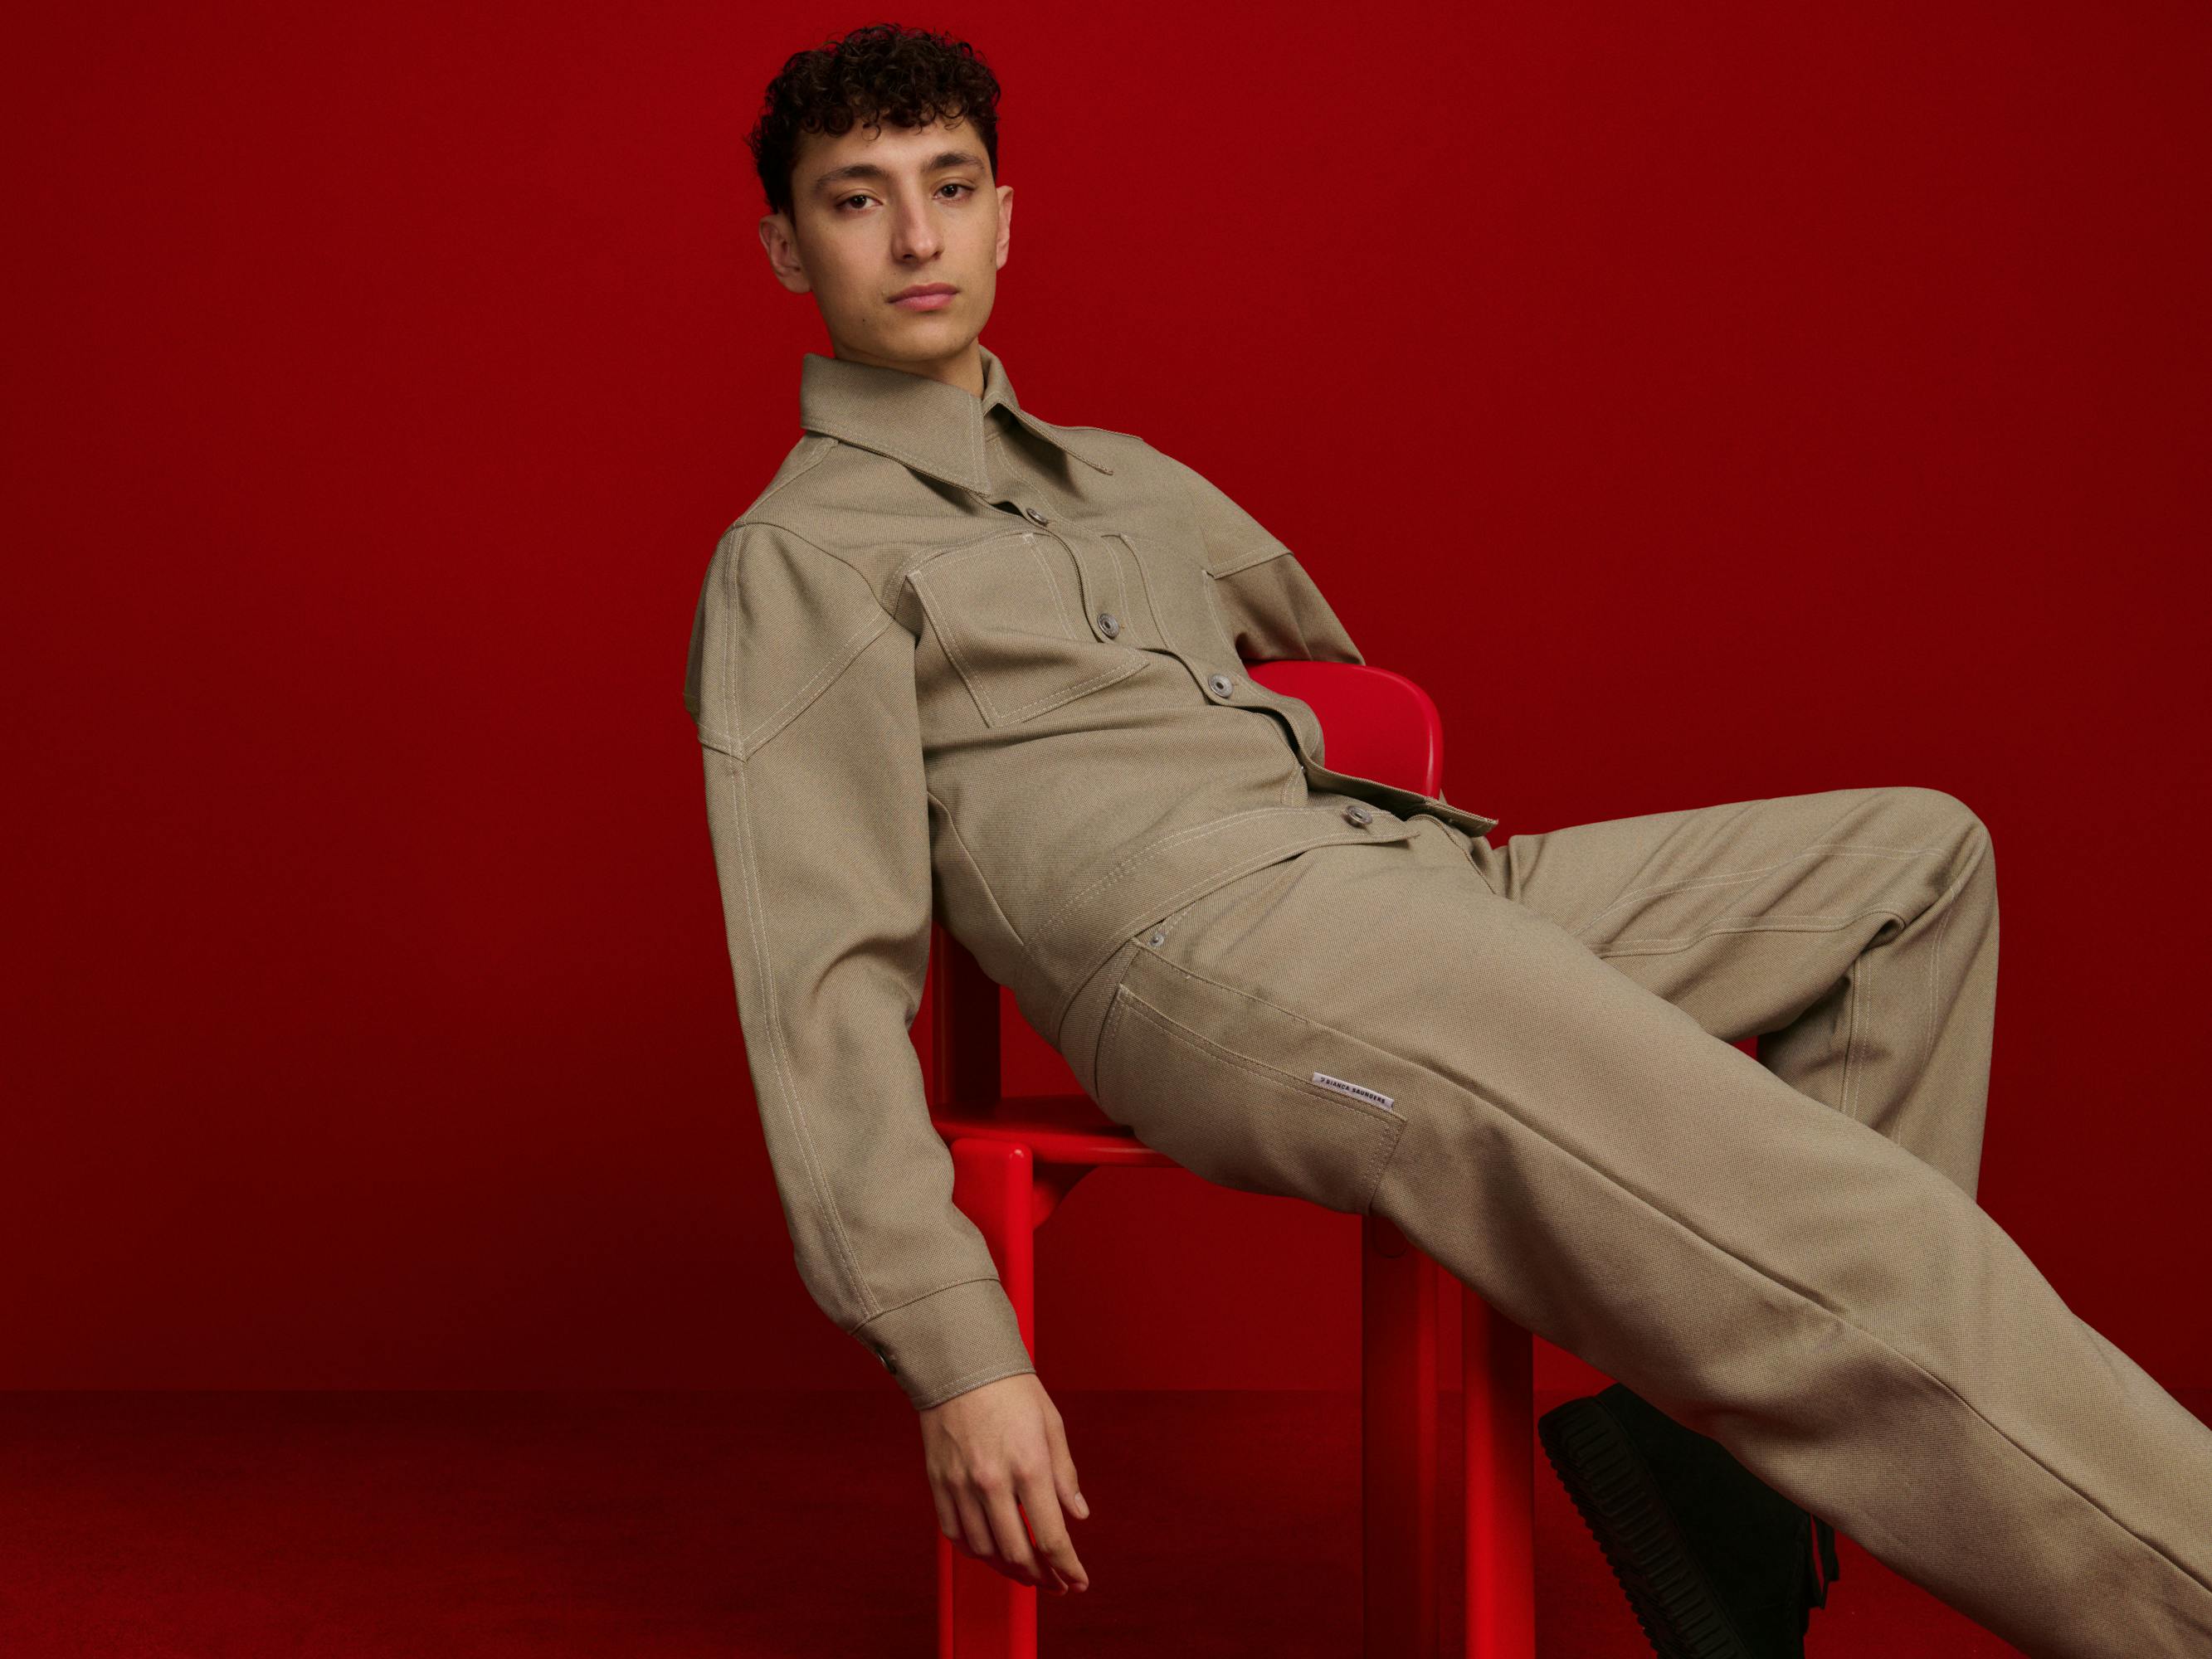 Jayden Revri wears a khaki suit against a a red background, sitting sideways in a red chair.